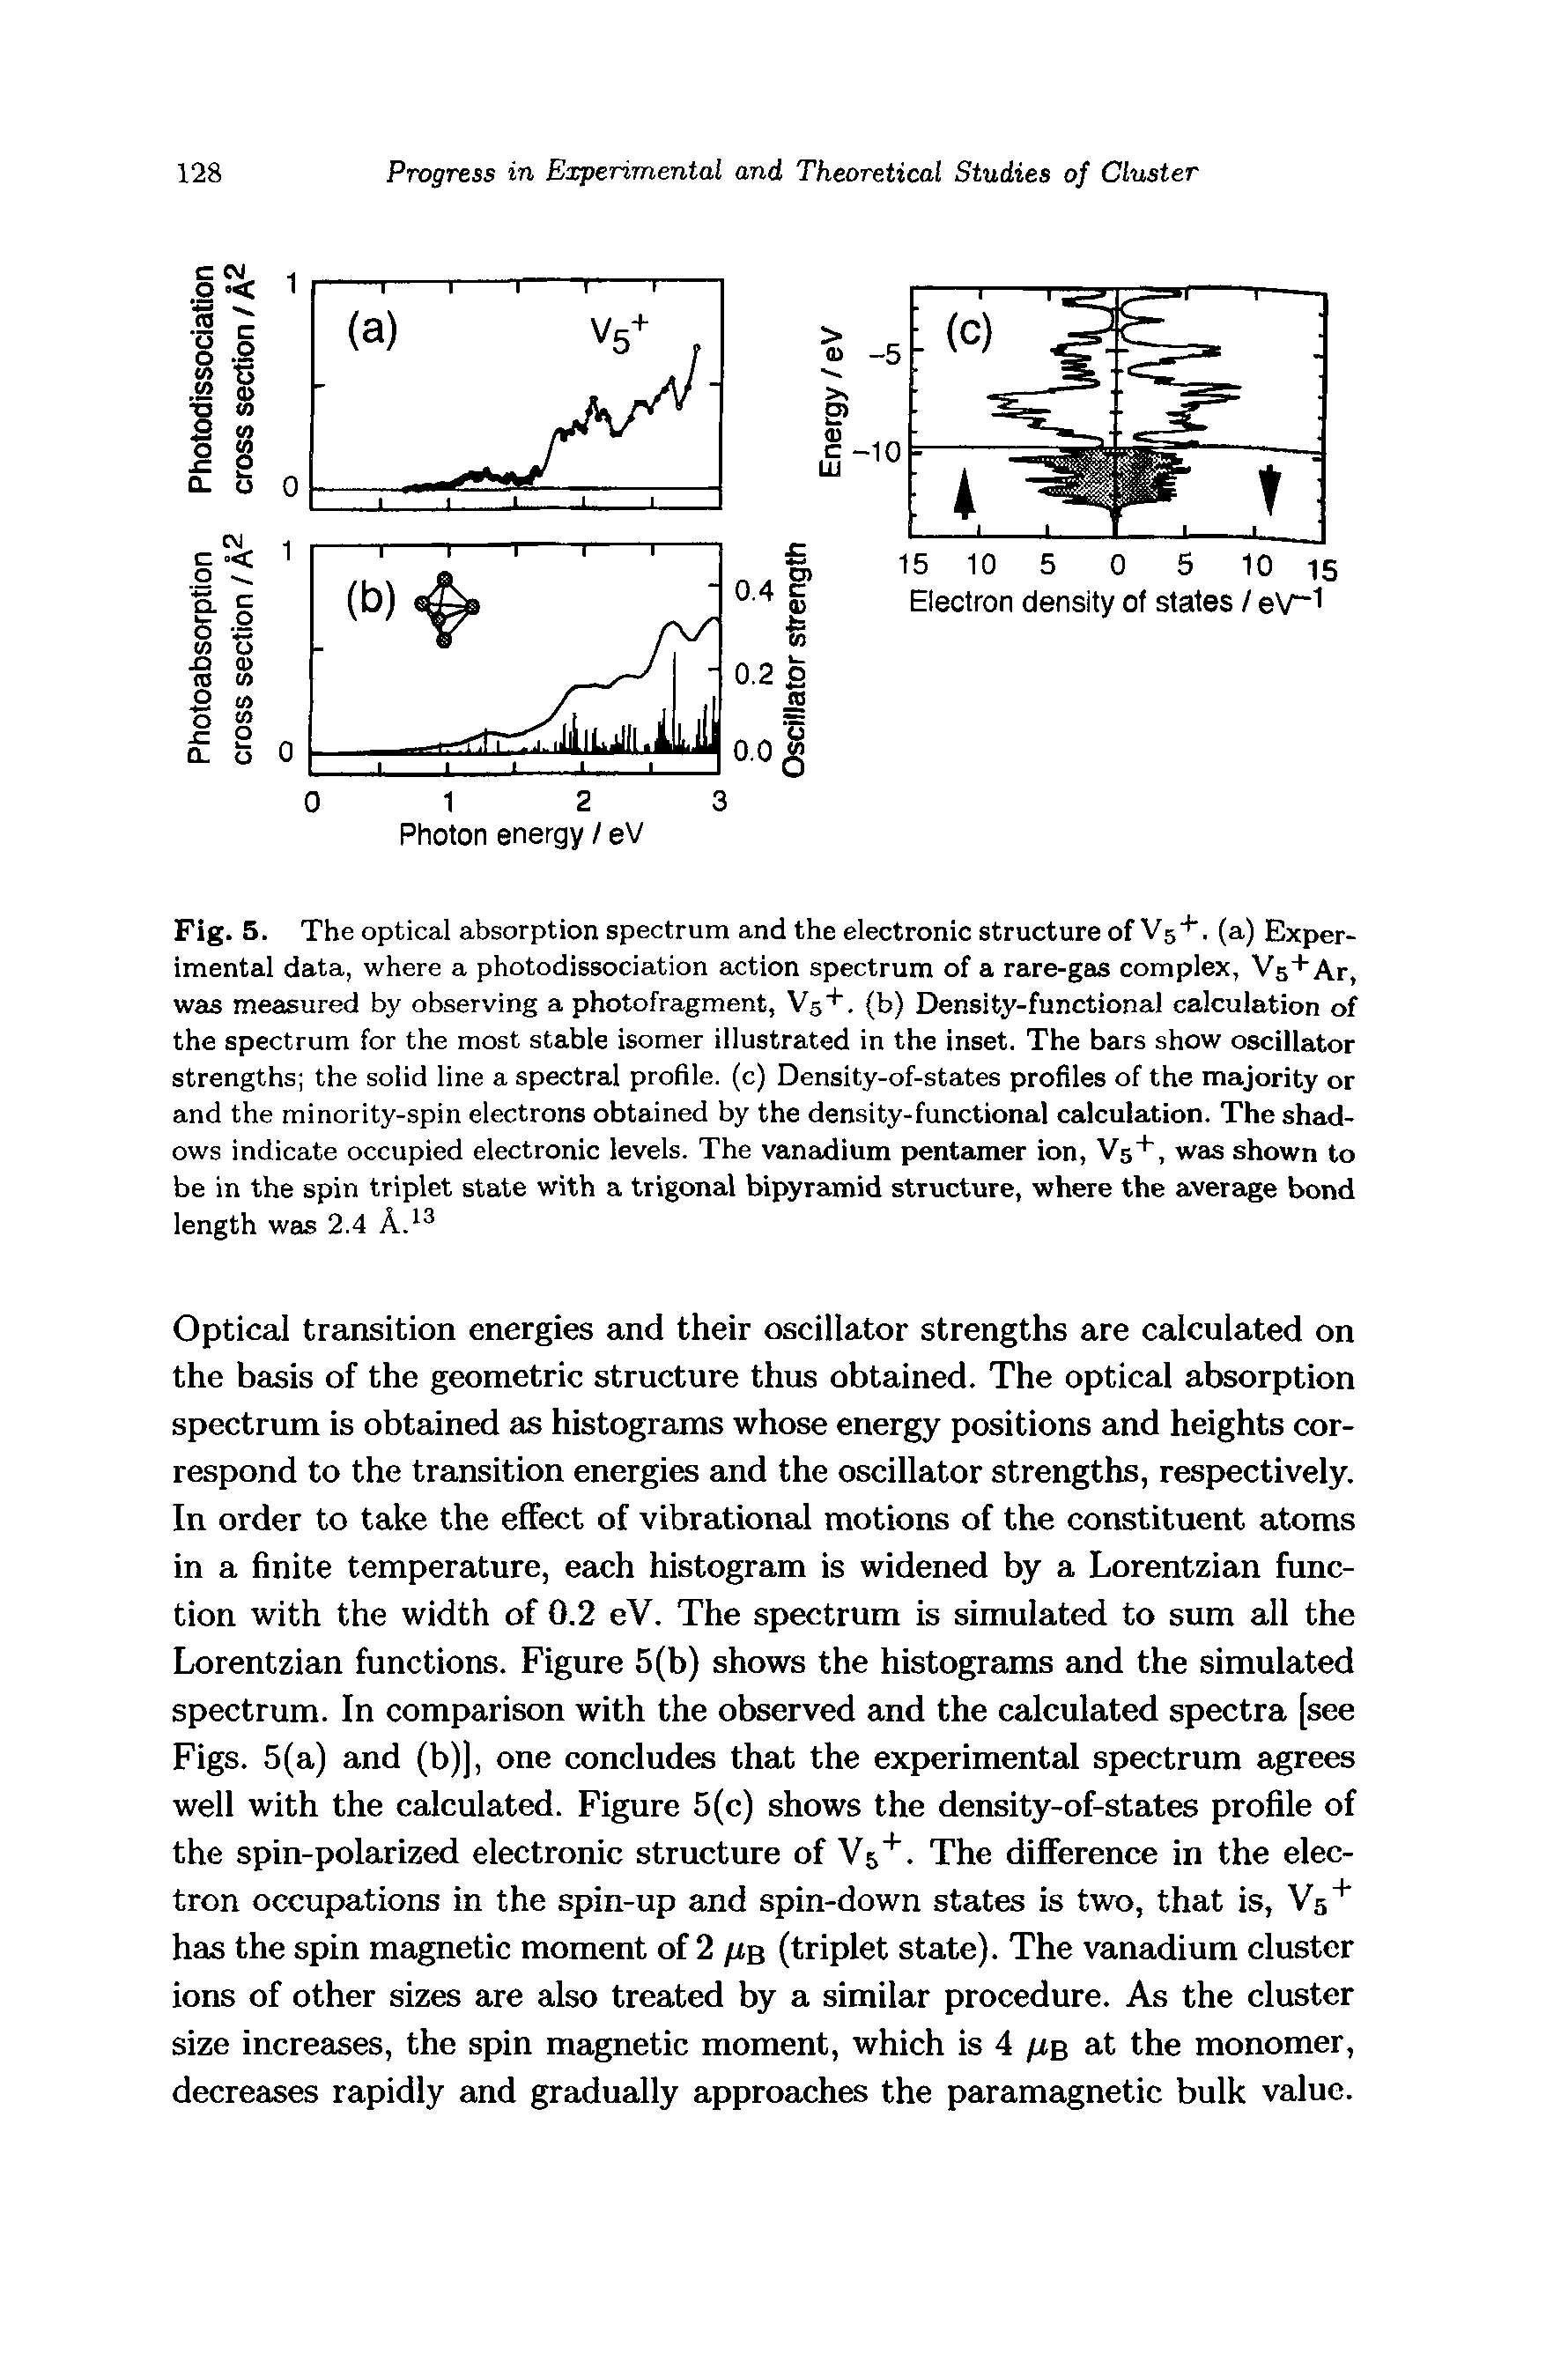 Fig. 5. The optical absorption spectrum and the electronic structure of Vs" ", (a) Experimental data, where a photodissociation action spectrum of a rare-gas complex, Vs+Ar, was measured by observing a photofragment, Vs+. (b) Density-functional calculation of the spectrum for the most stable isomer illustrated in the inset. The bars show oscillator strengths the solid line a spectral profile, (c) Density-of-states profiles of the majority or and the minority-spin electrons obtained by the density-functional calculation. The shadows indicate occupied electronic levels. The vanadium pentamer ion. Vs" ", was shown to be in the spin triplet state with a trigonal bipyramid structure, where the average bond length was 2.4...